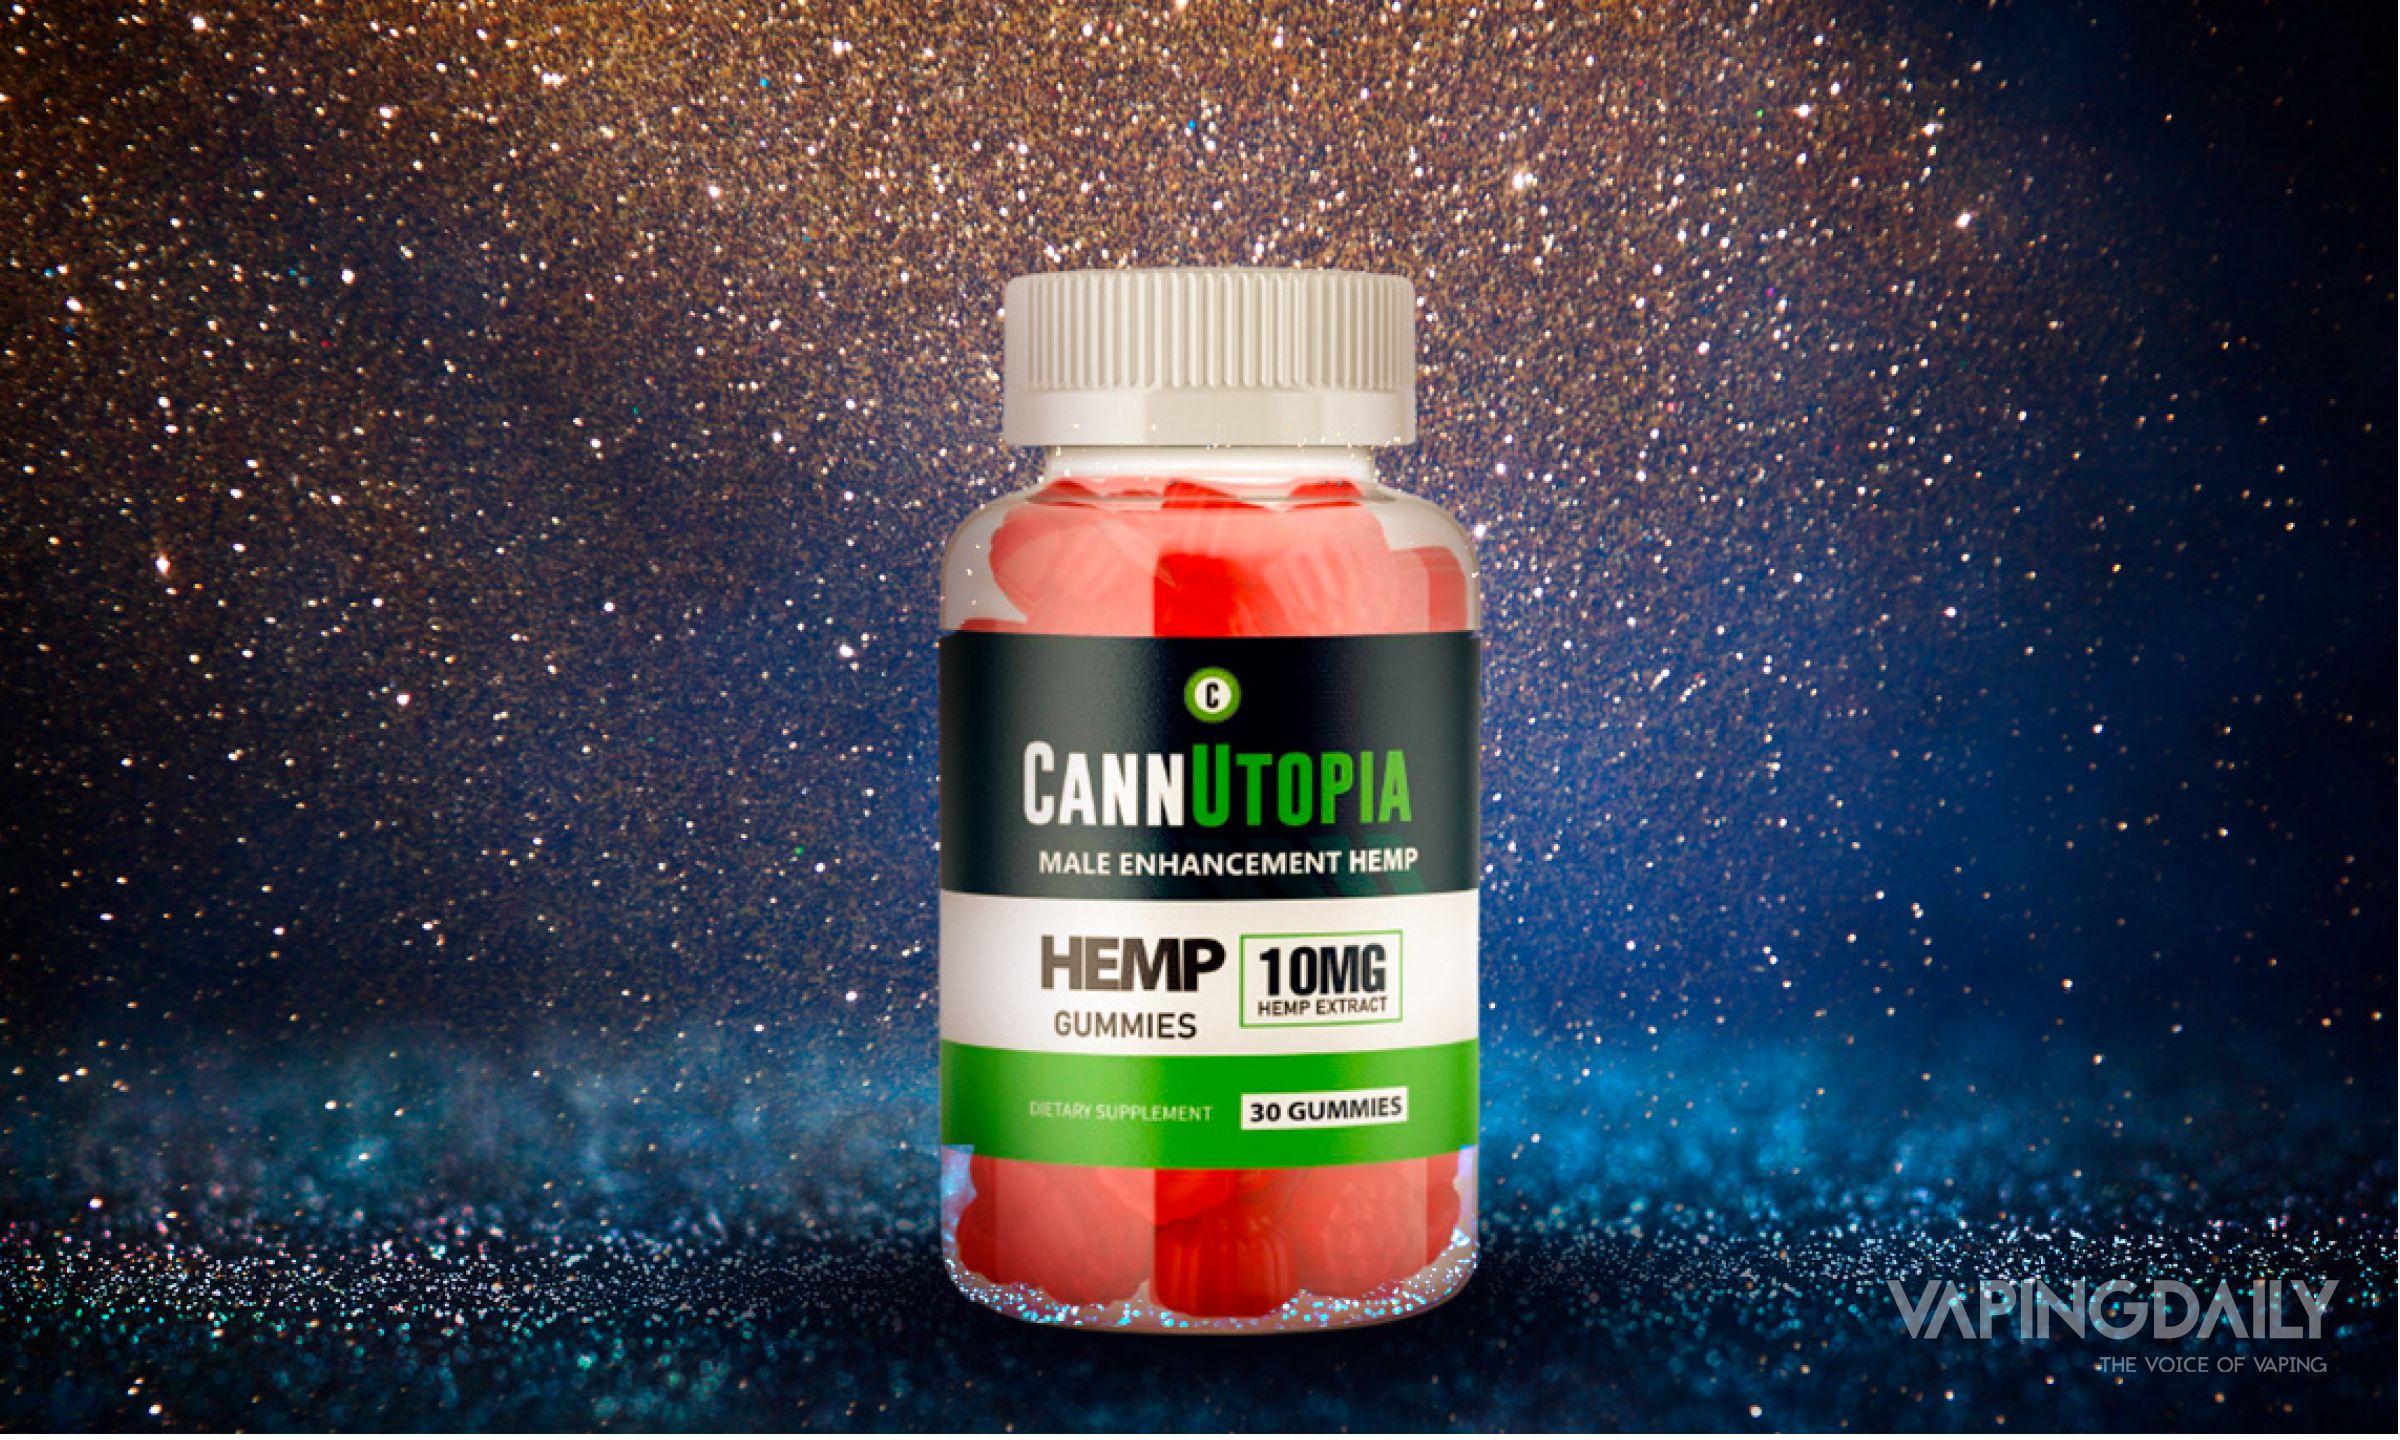 cannutopia-review-image.jpg